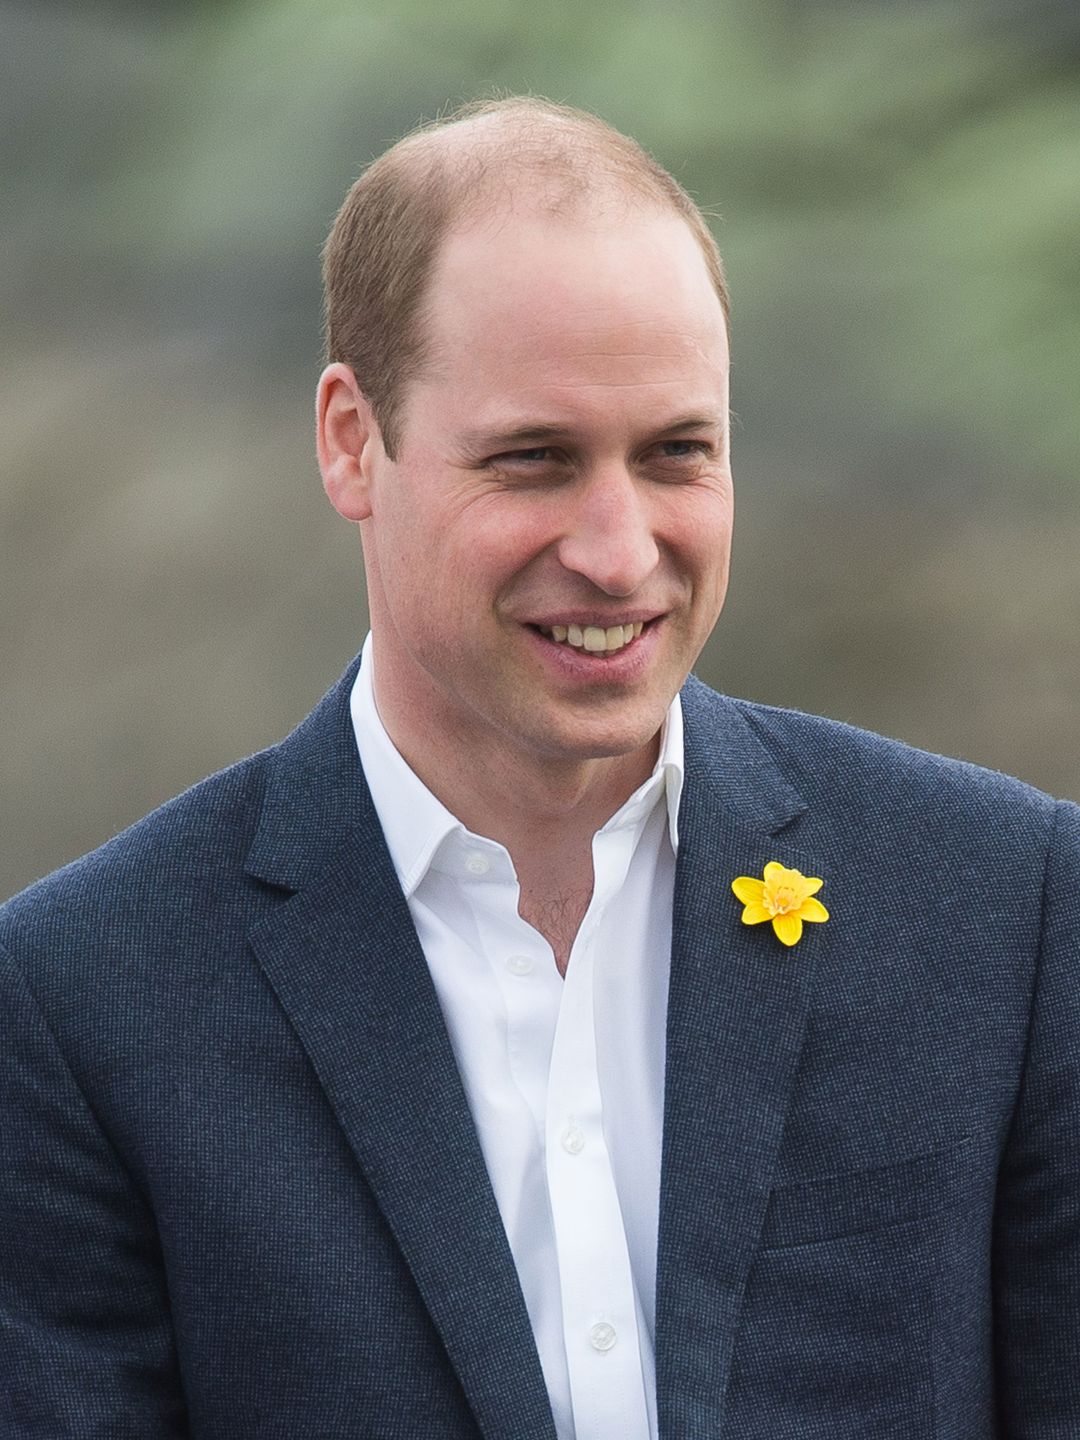 Prince William young age